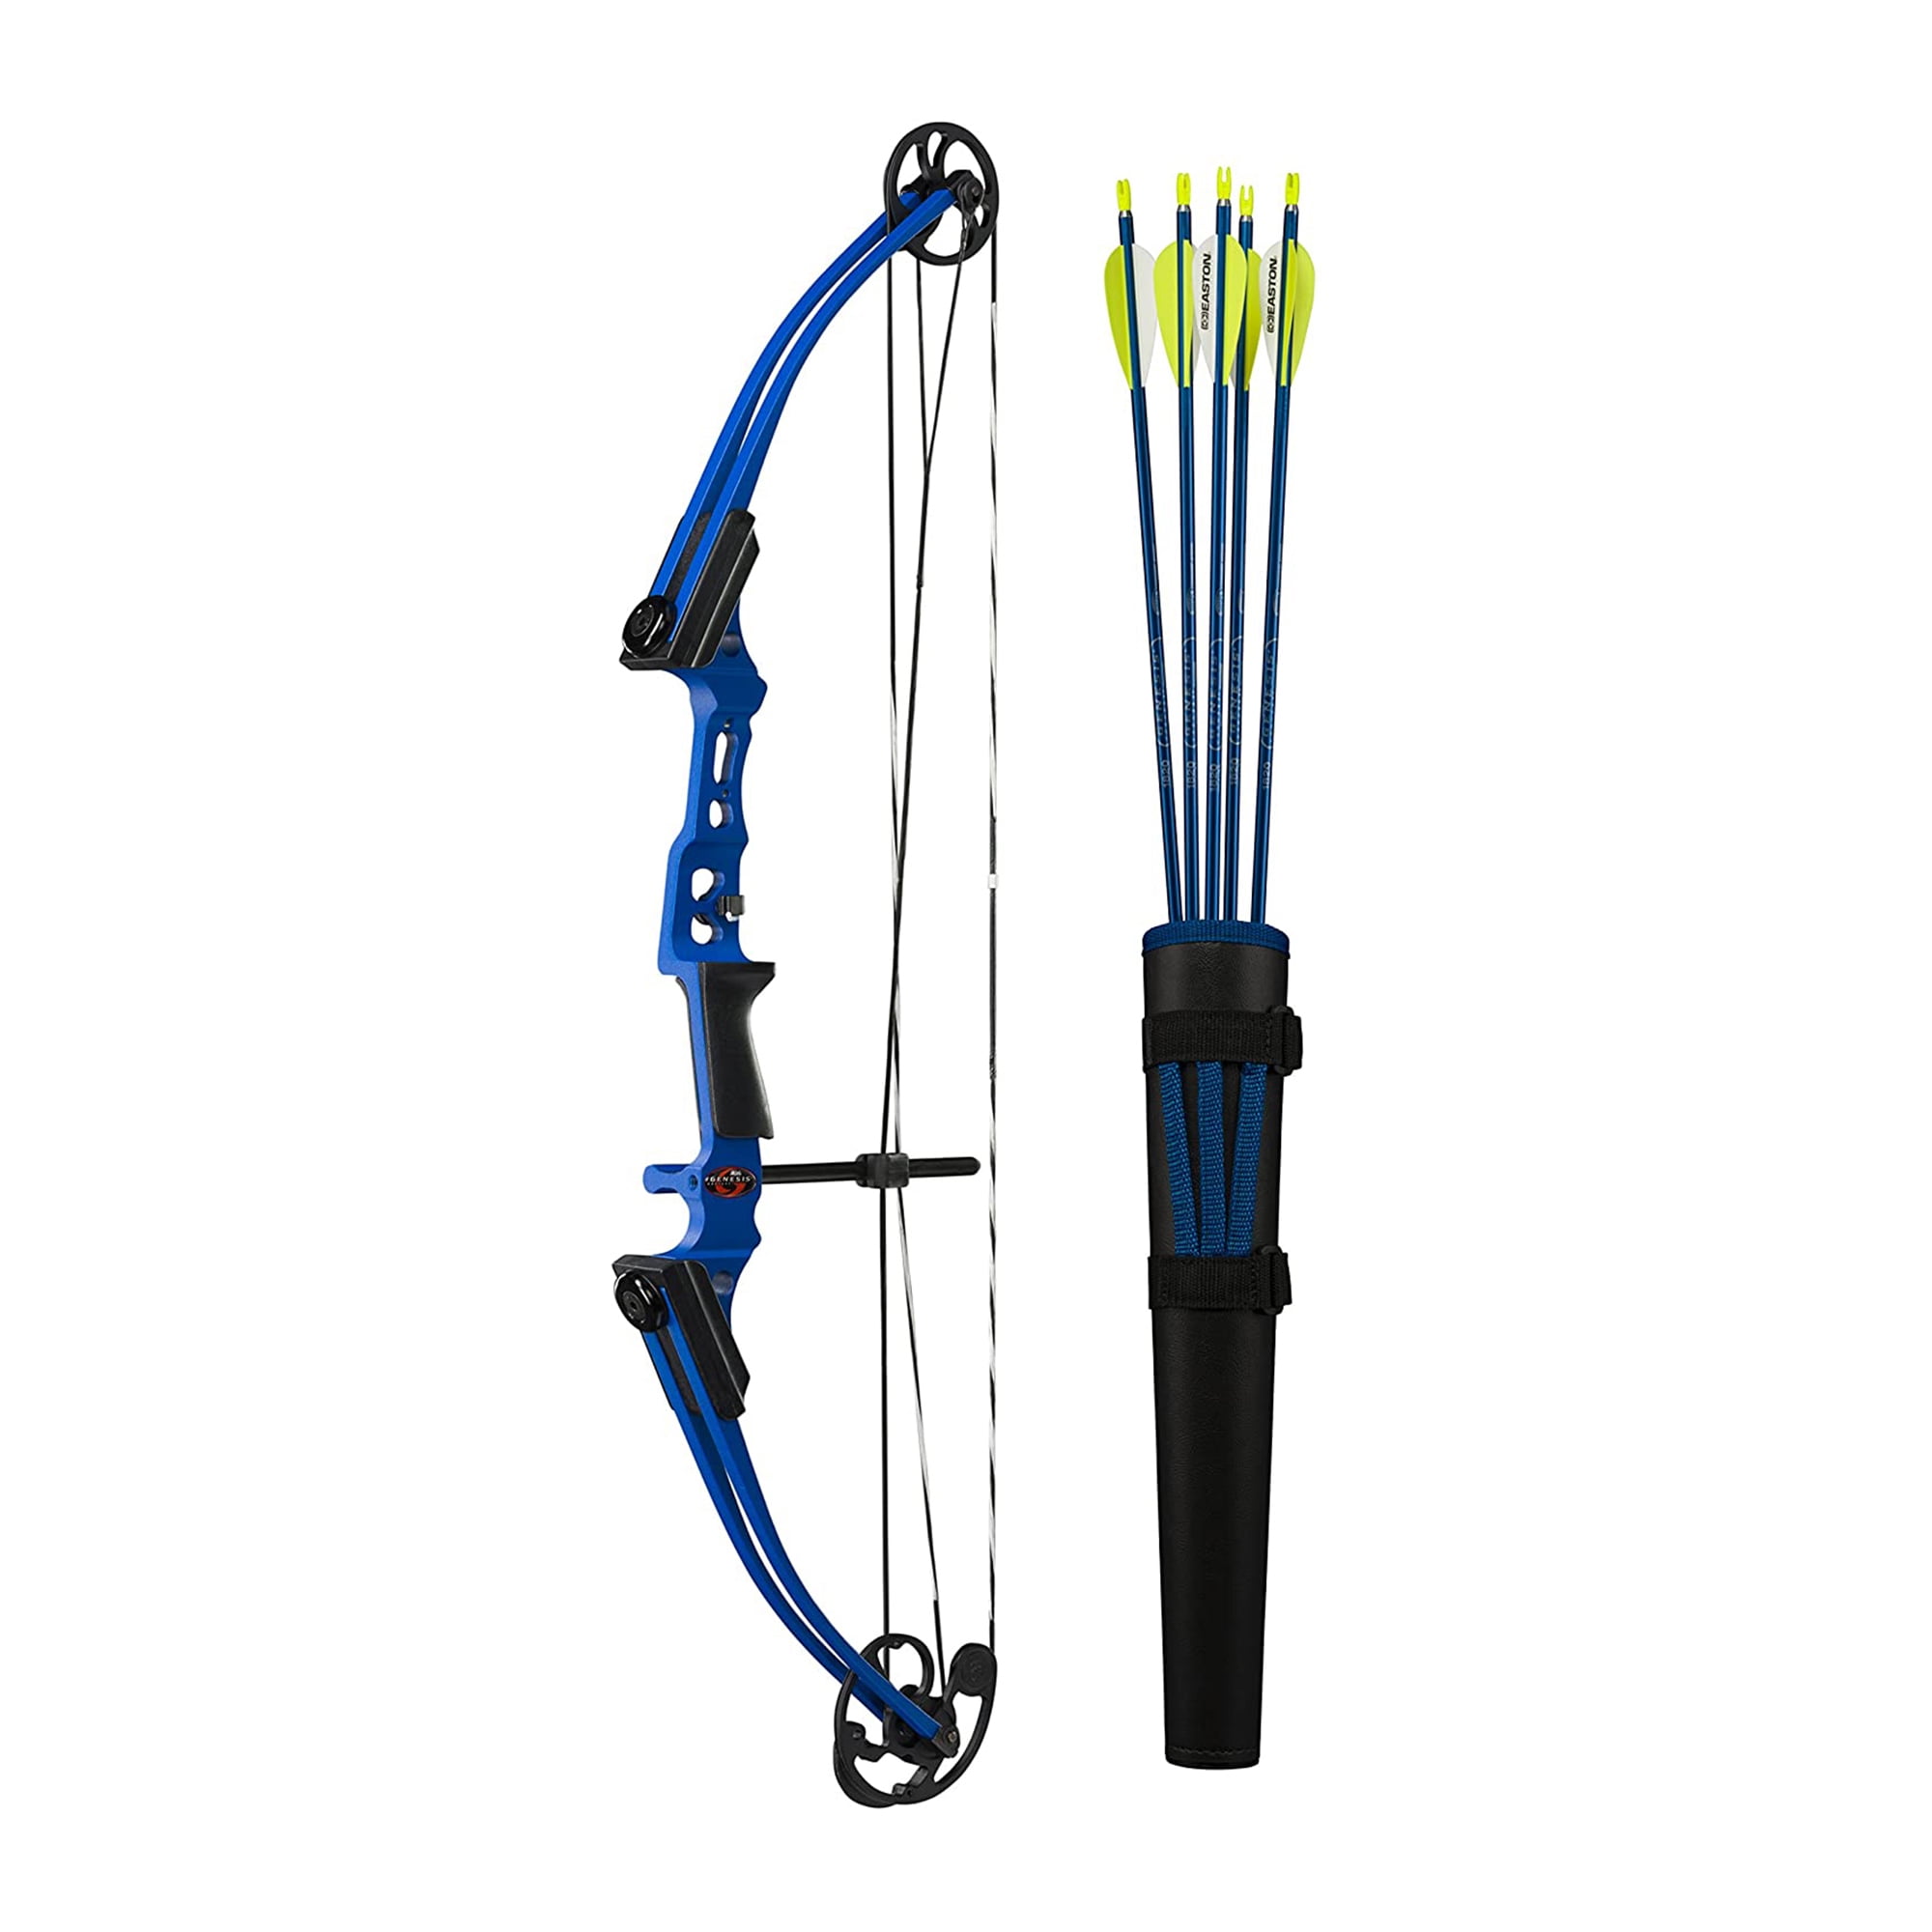 Details about   Bow Press Portable Composite Archery Shooting Tool 